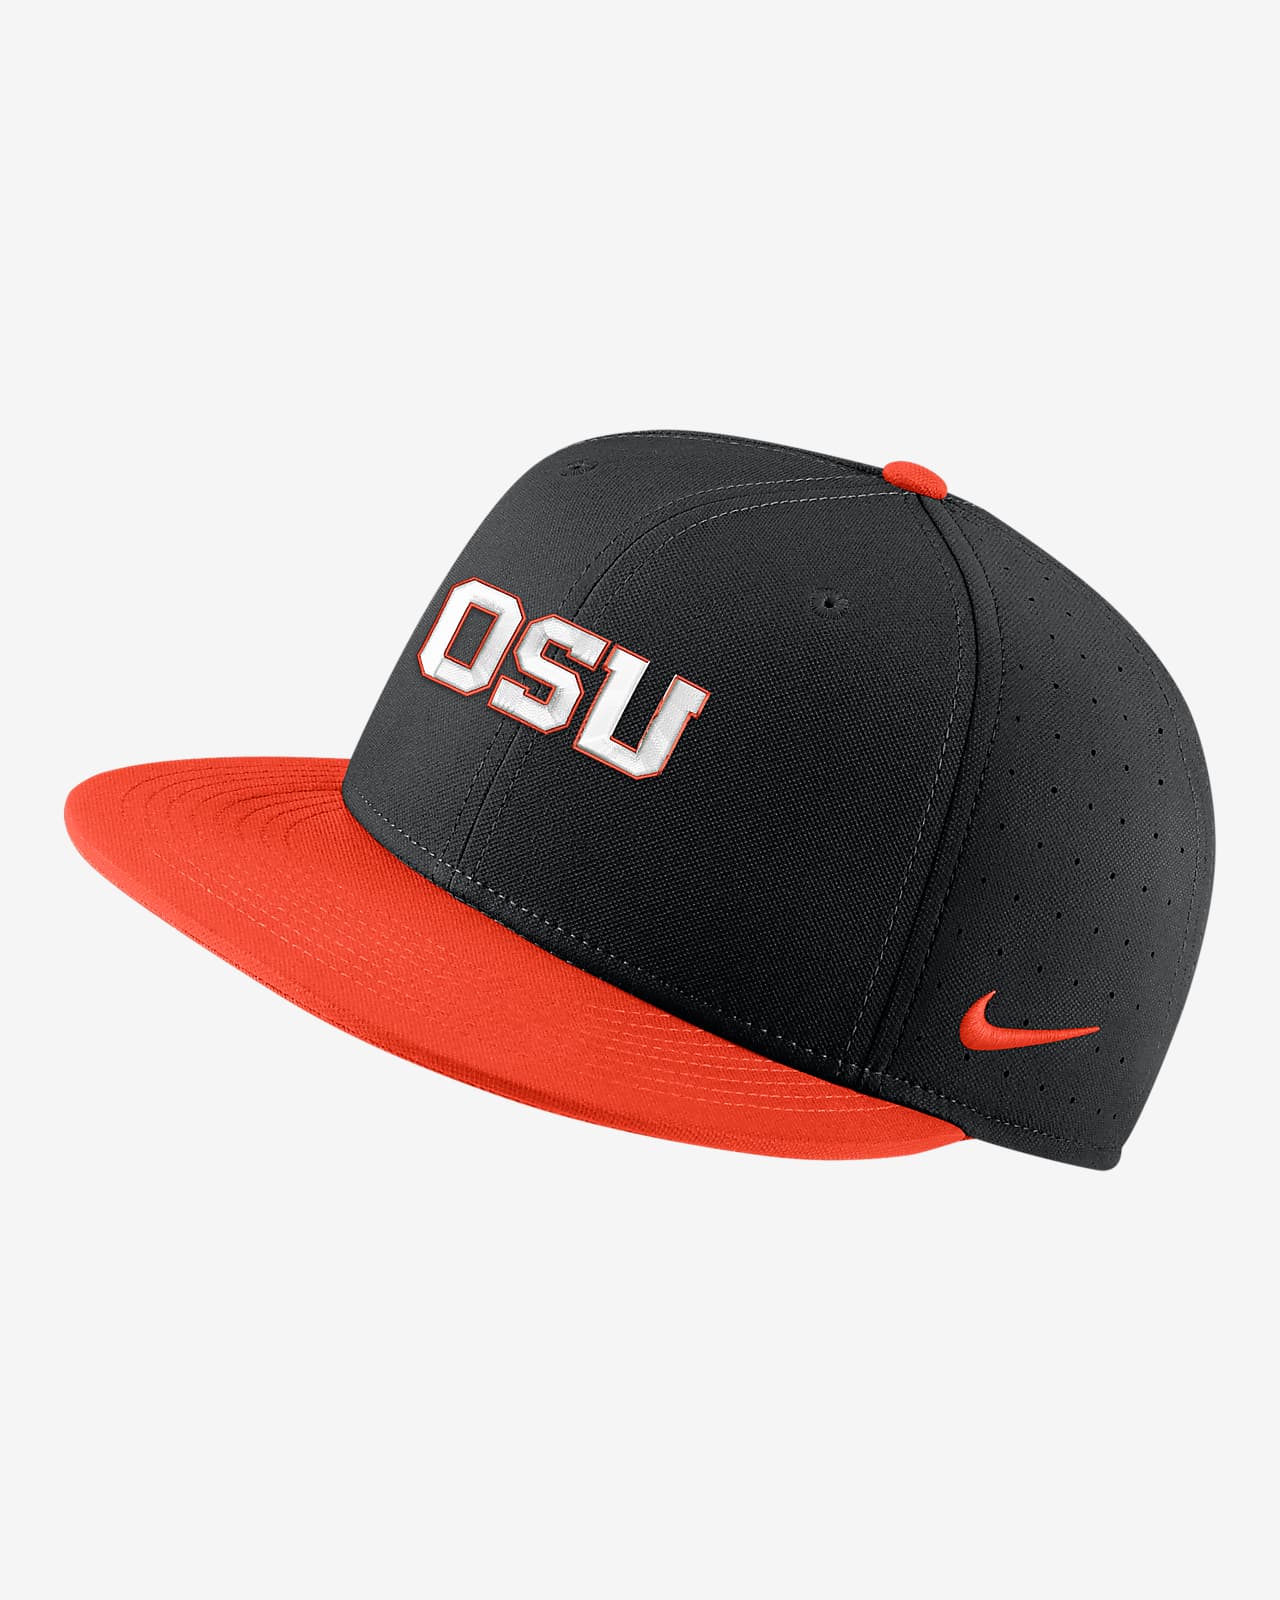 Oregon State Nike College Fitted Baseball Hat